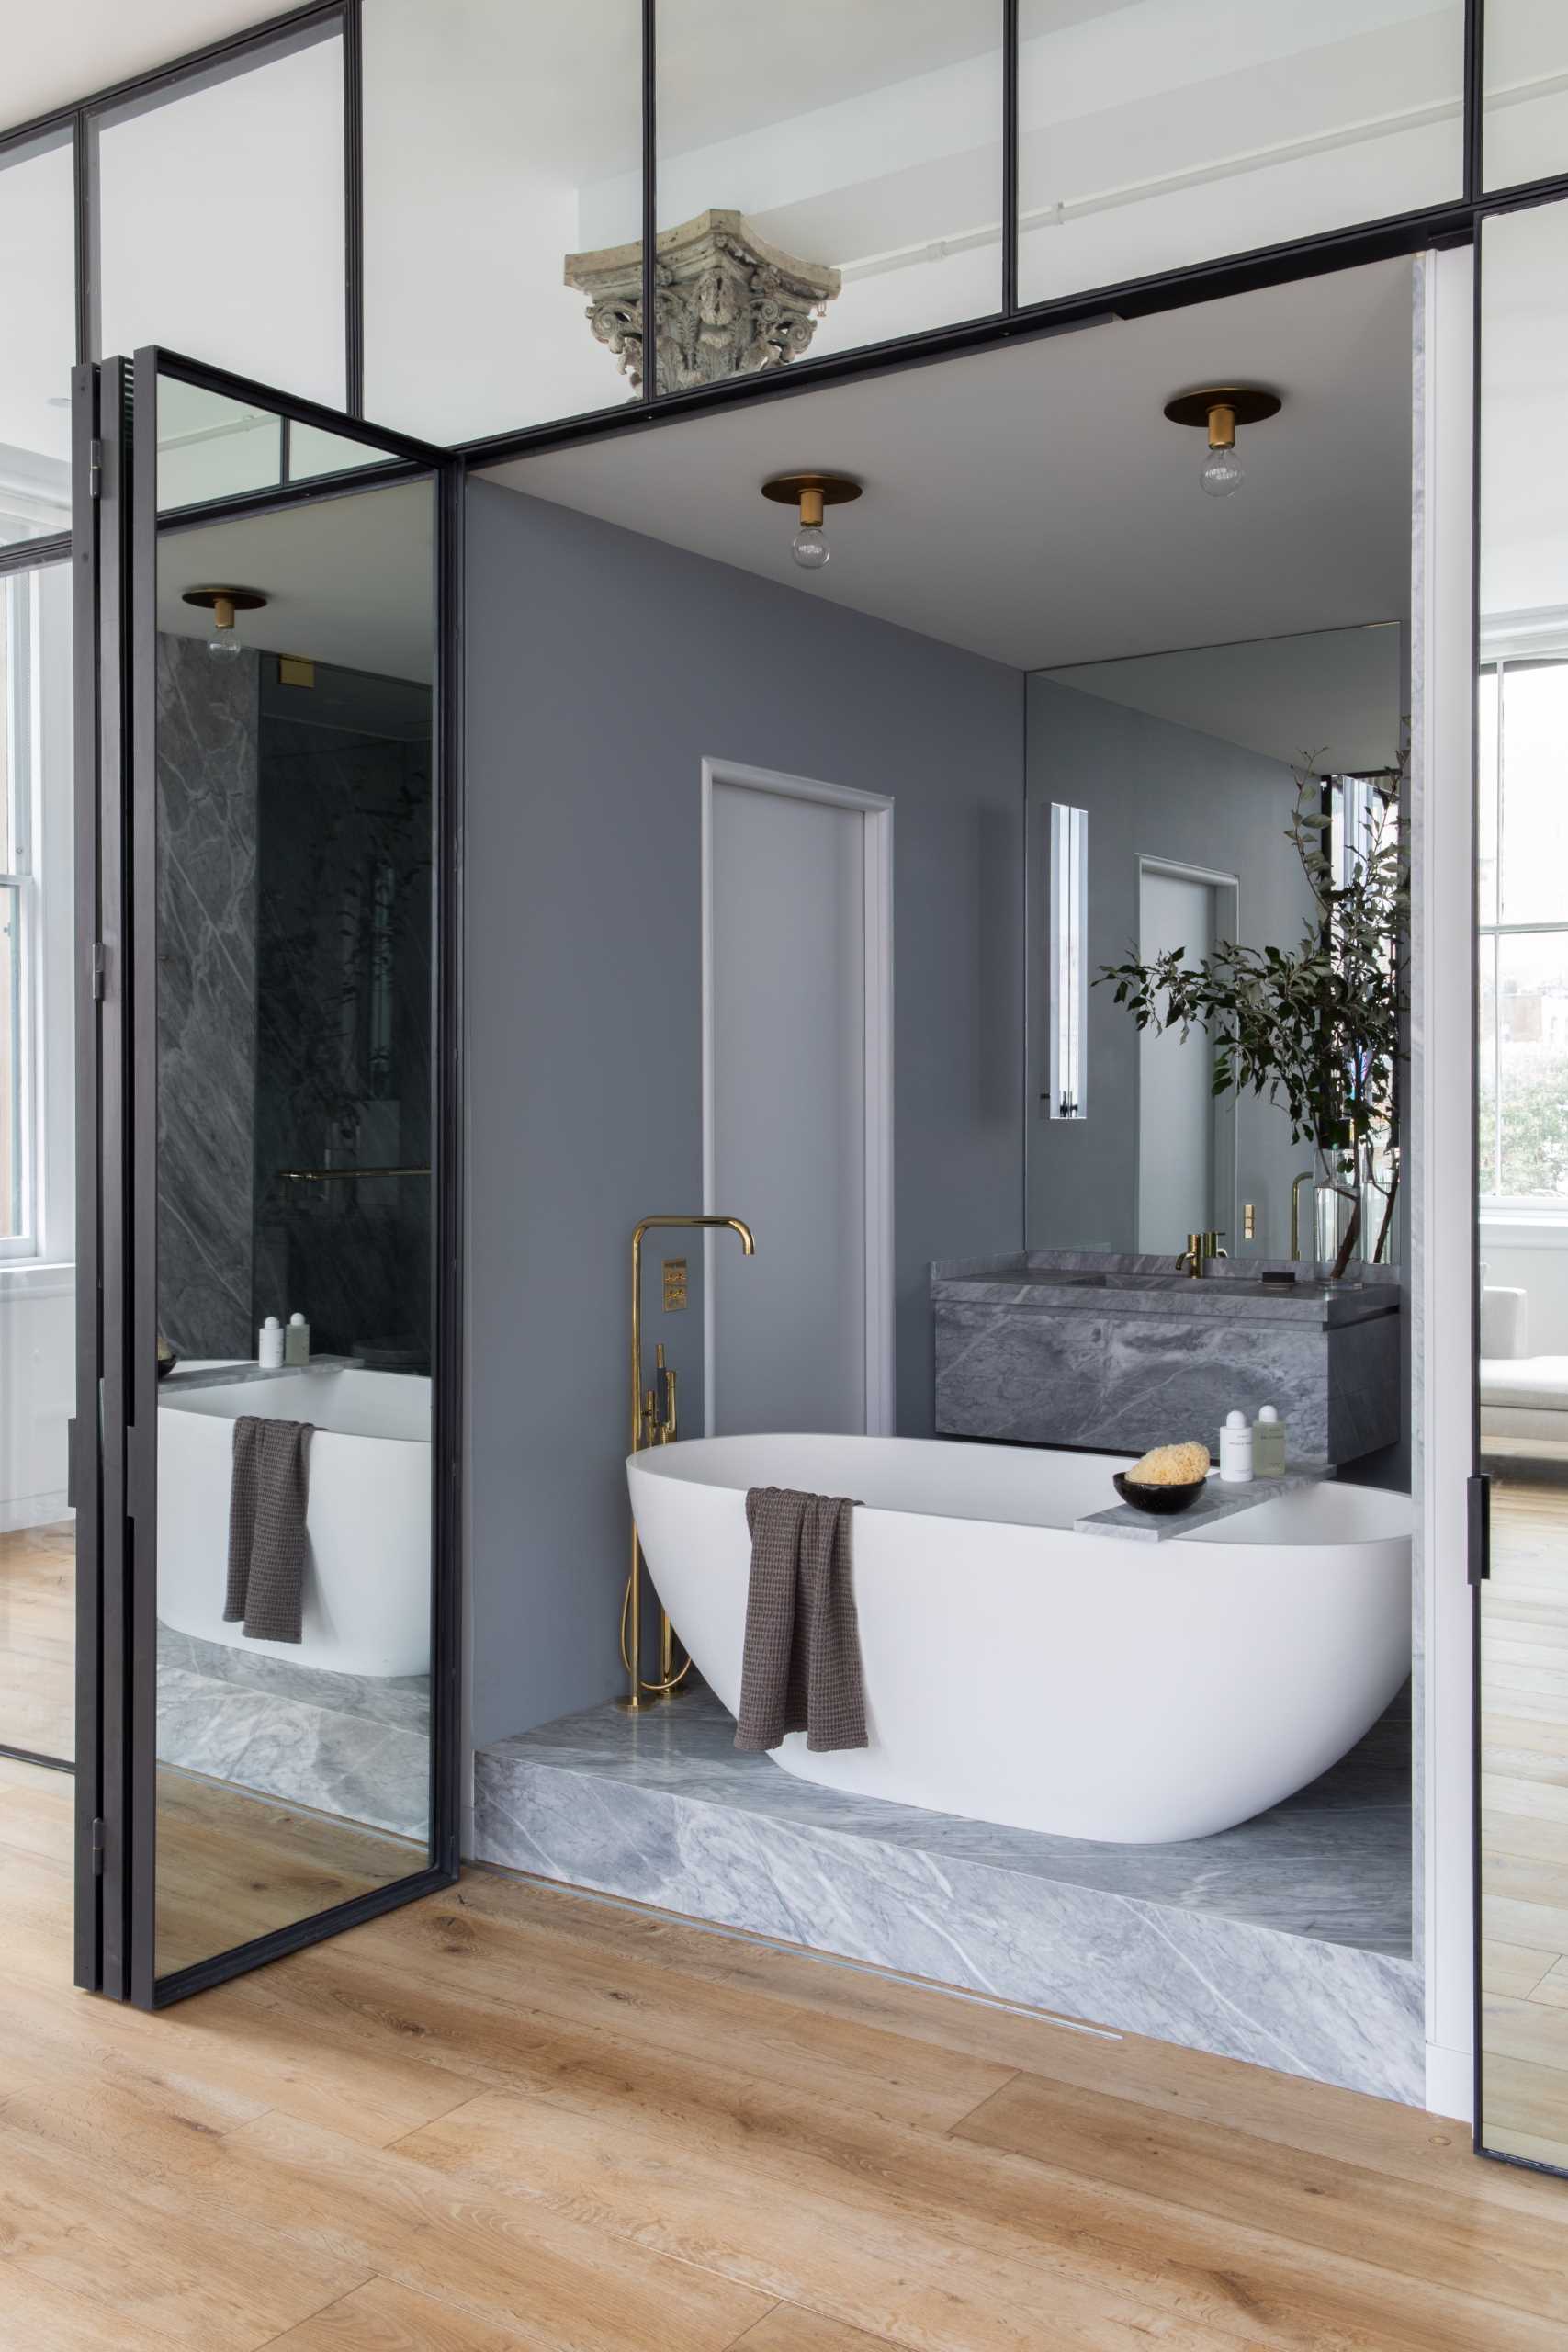 Inside this modern bathroom, there's a monobloc oval tub is encased in walls of softly-veined stone.